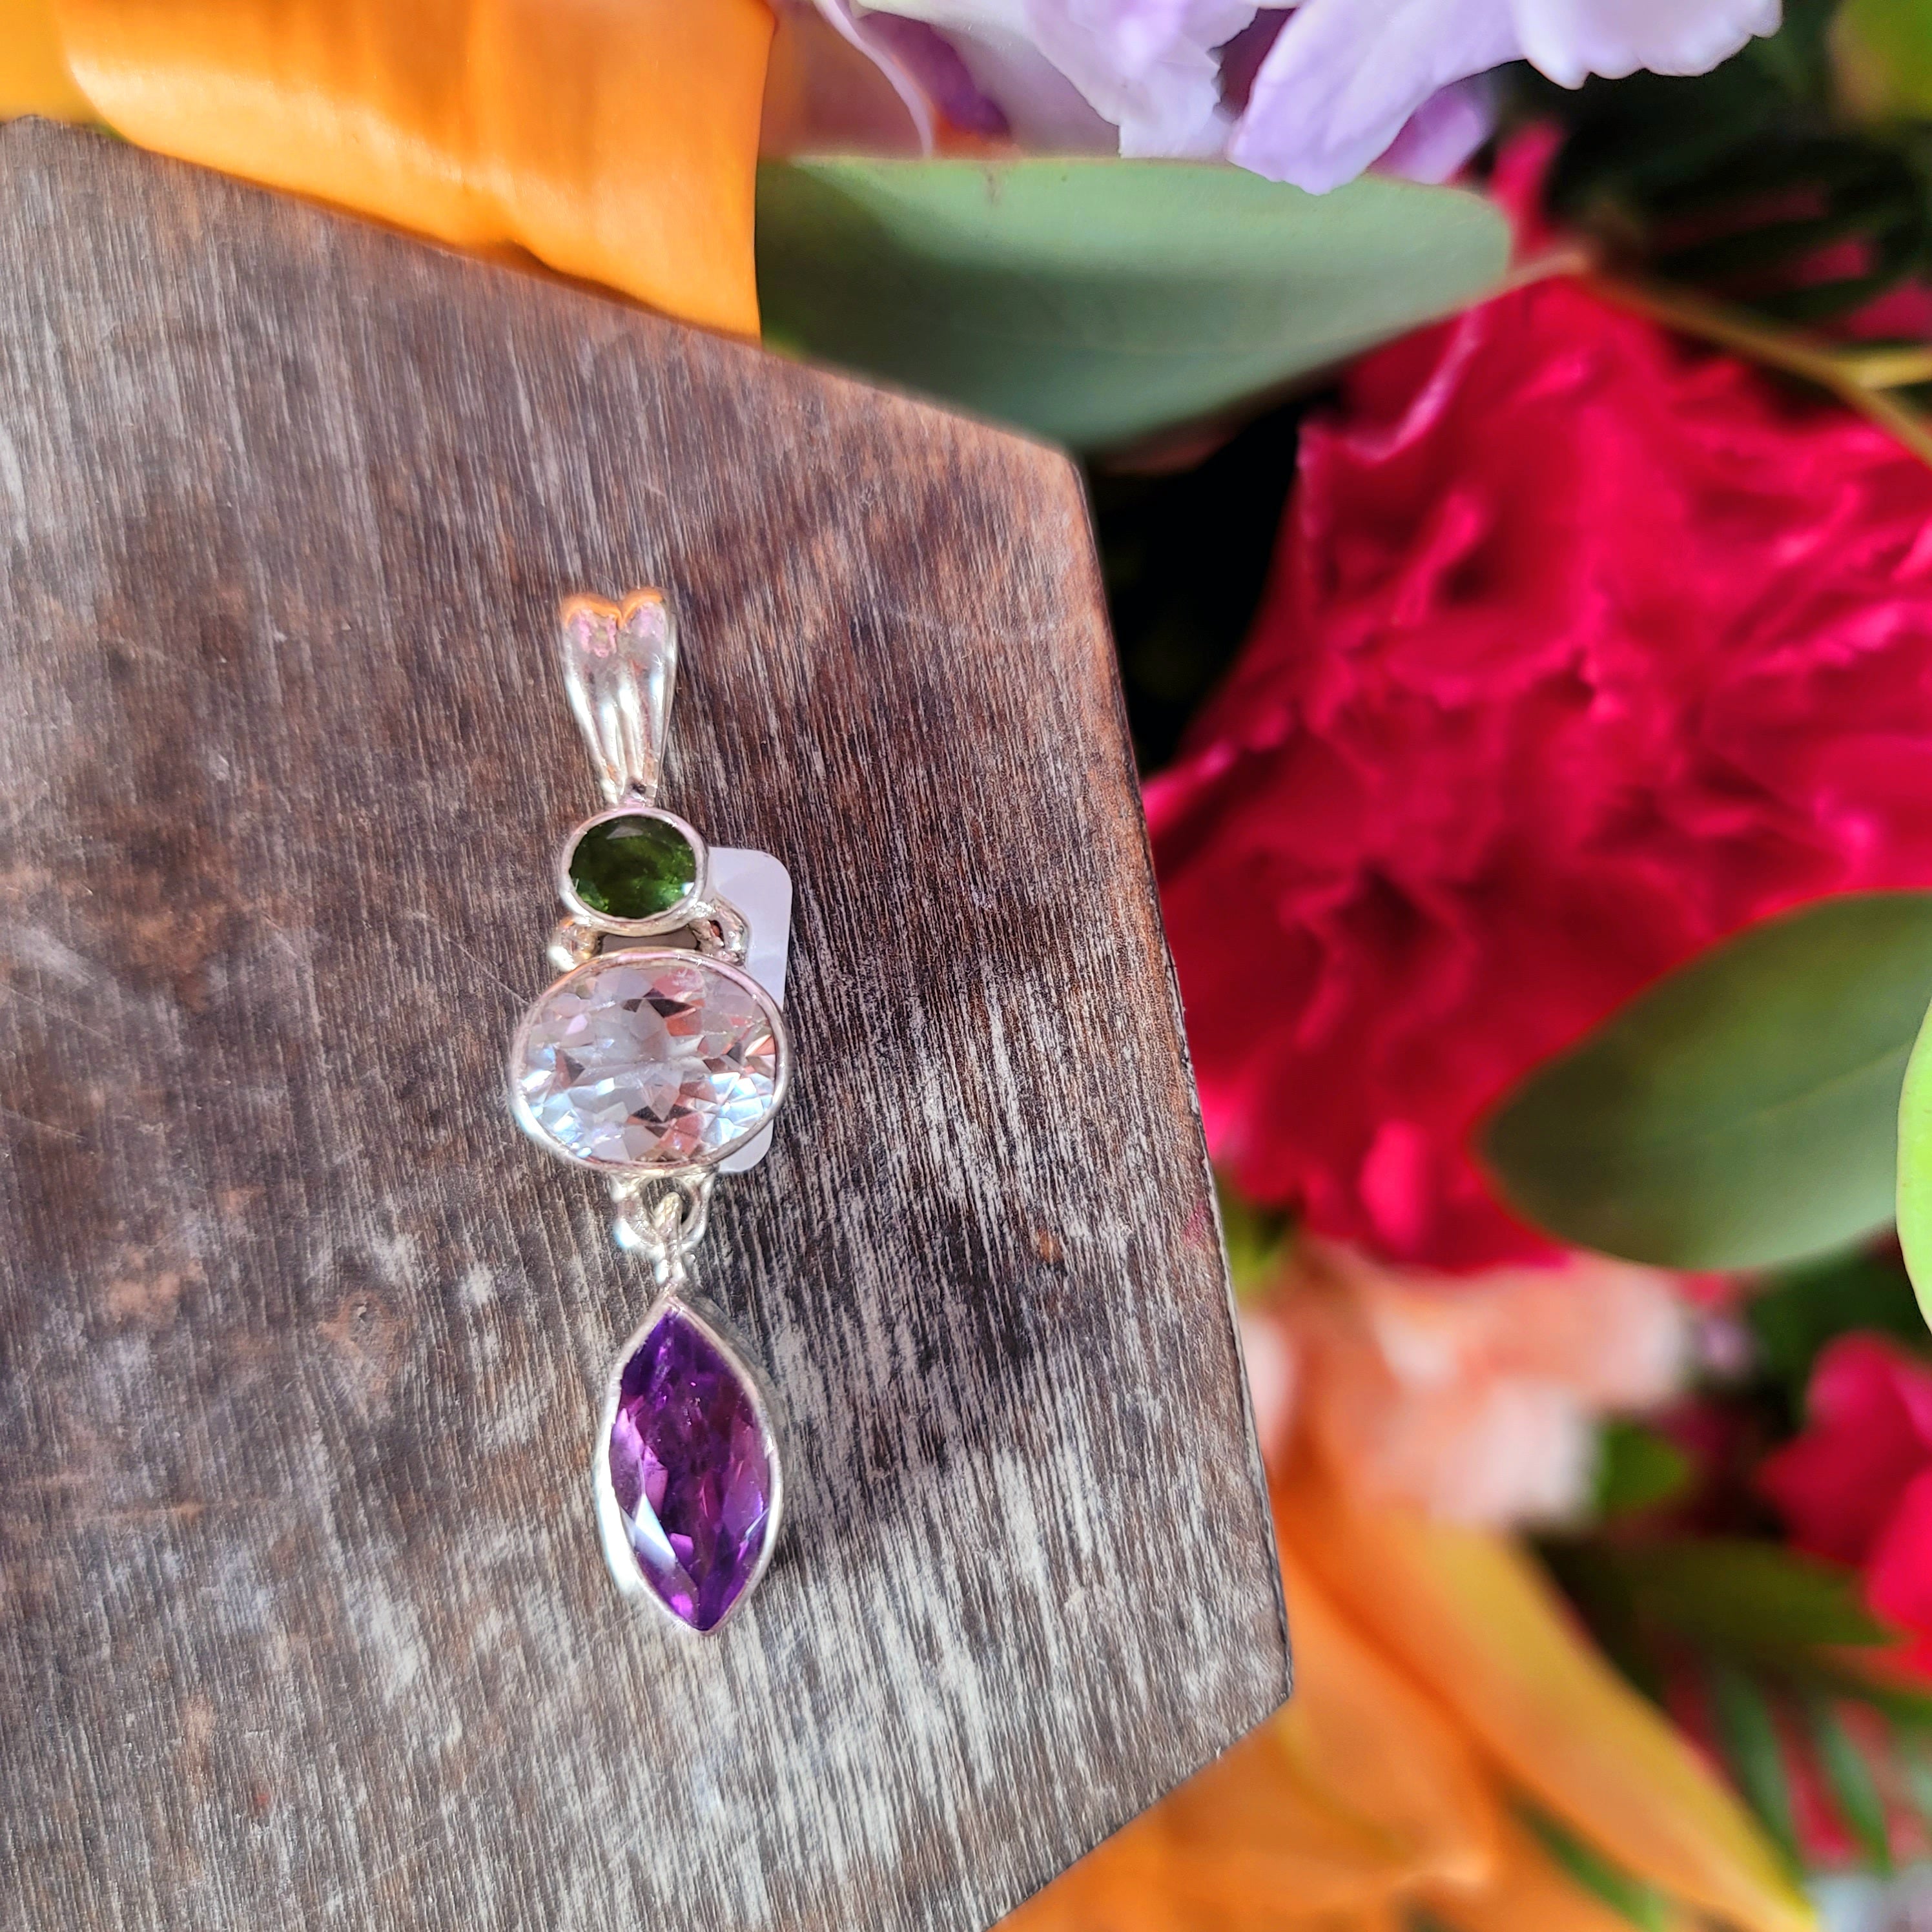 Green Tourmaline x White Topaz x Amethyst Pendant .925 Silver for Intuitively Expressing your Feelings